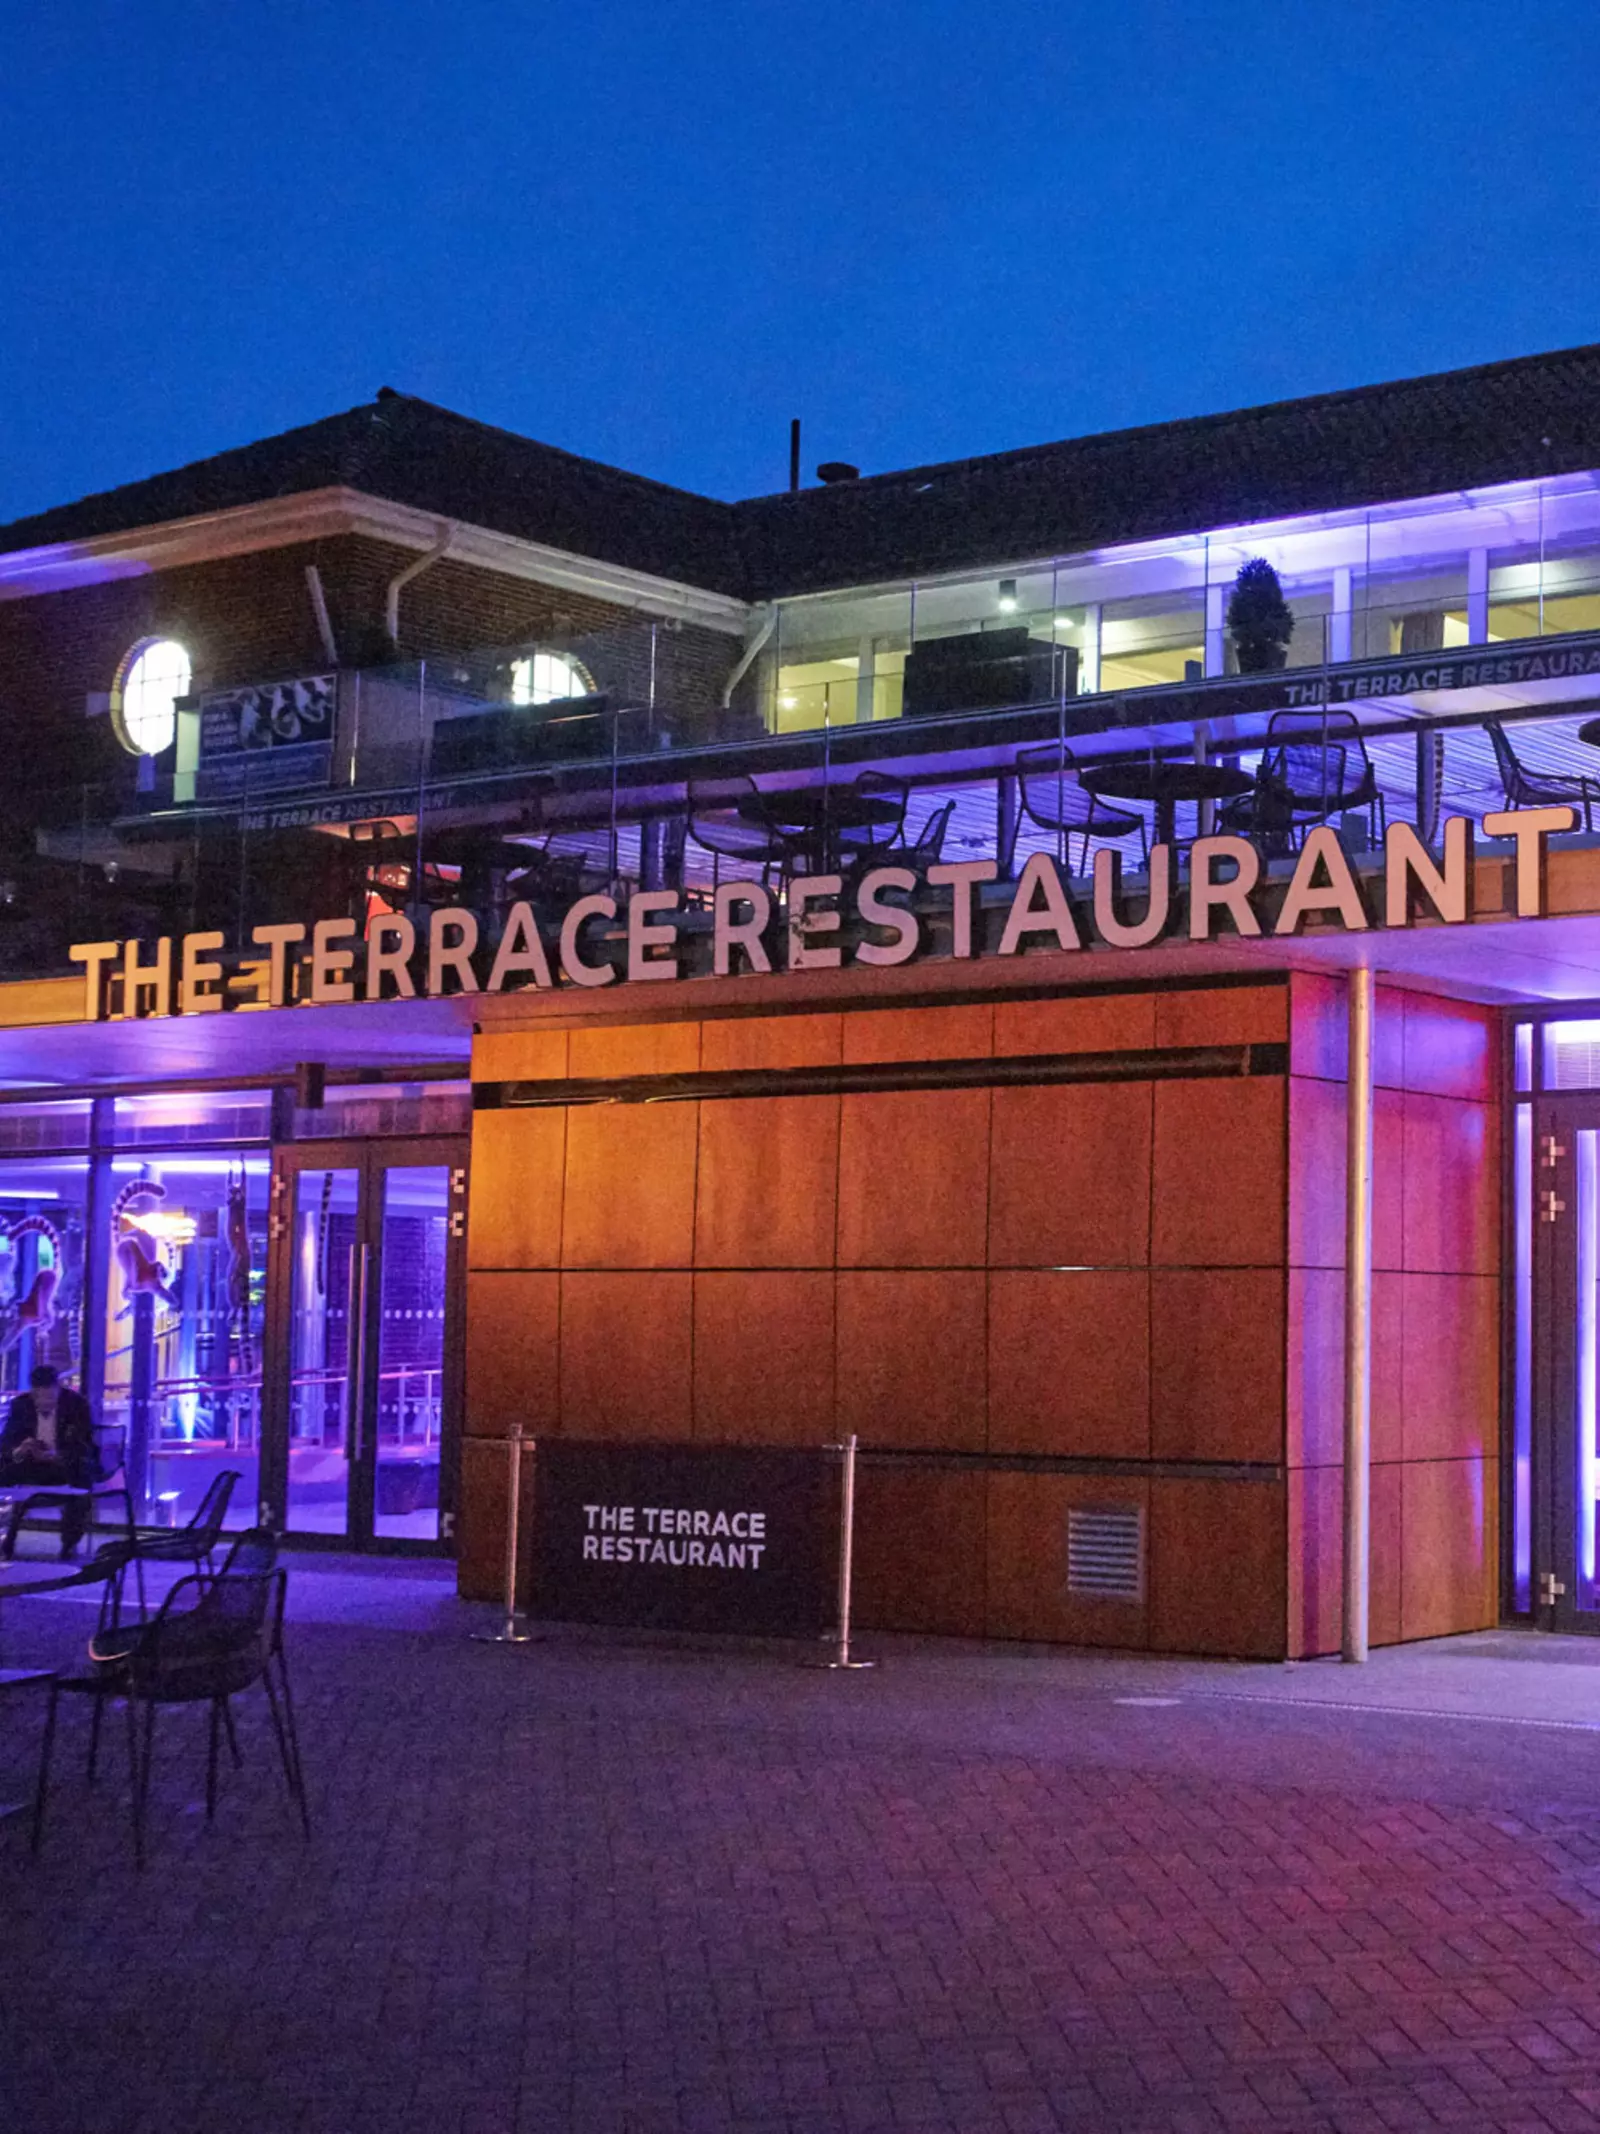 The Terrace Restaurant exterior lit up at night for an event